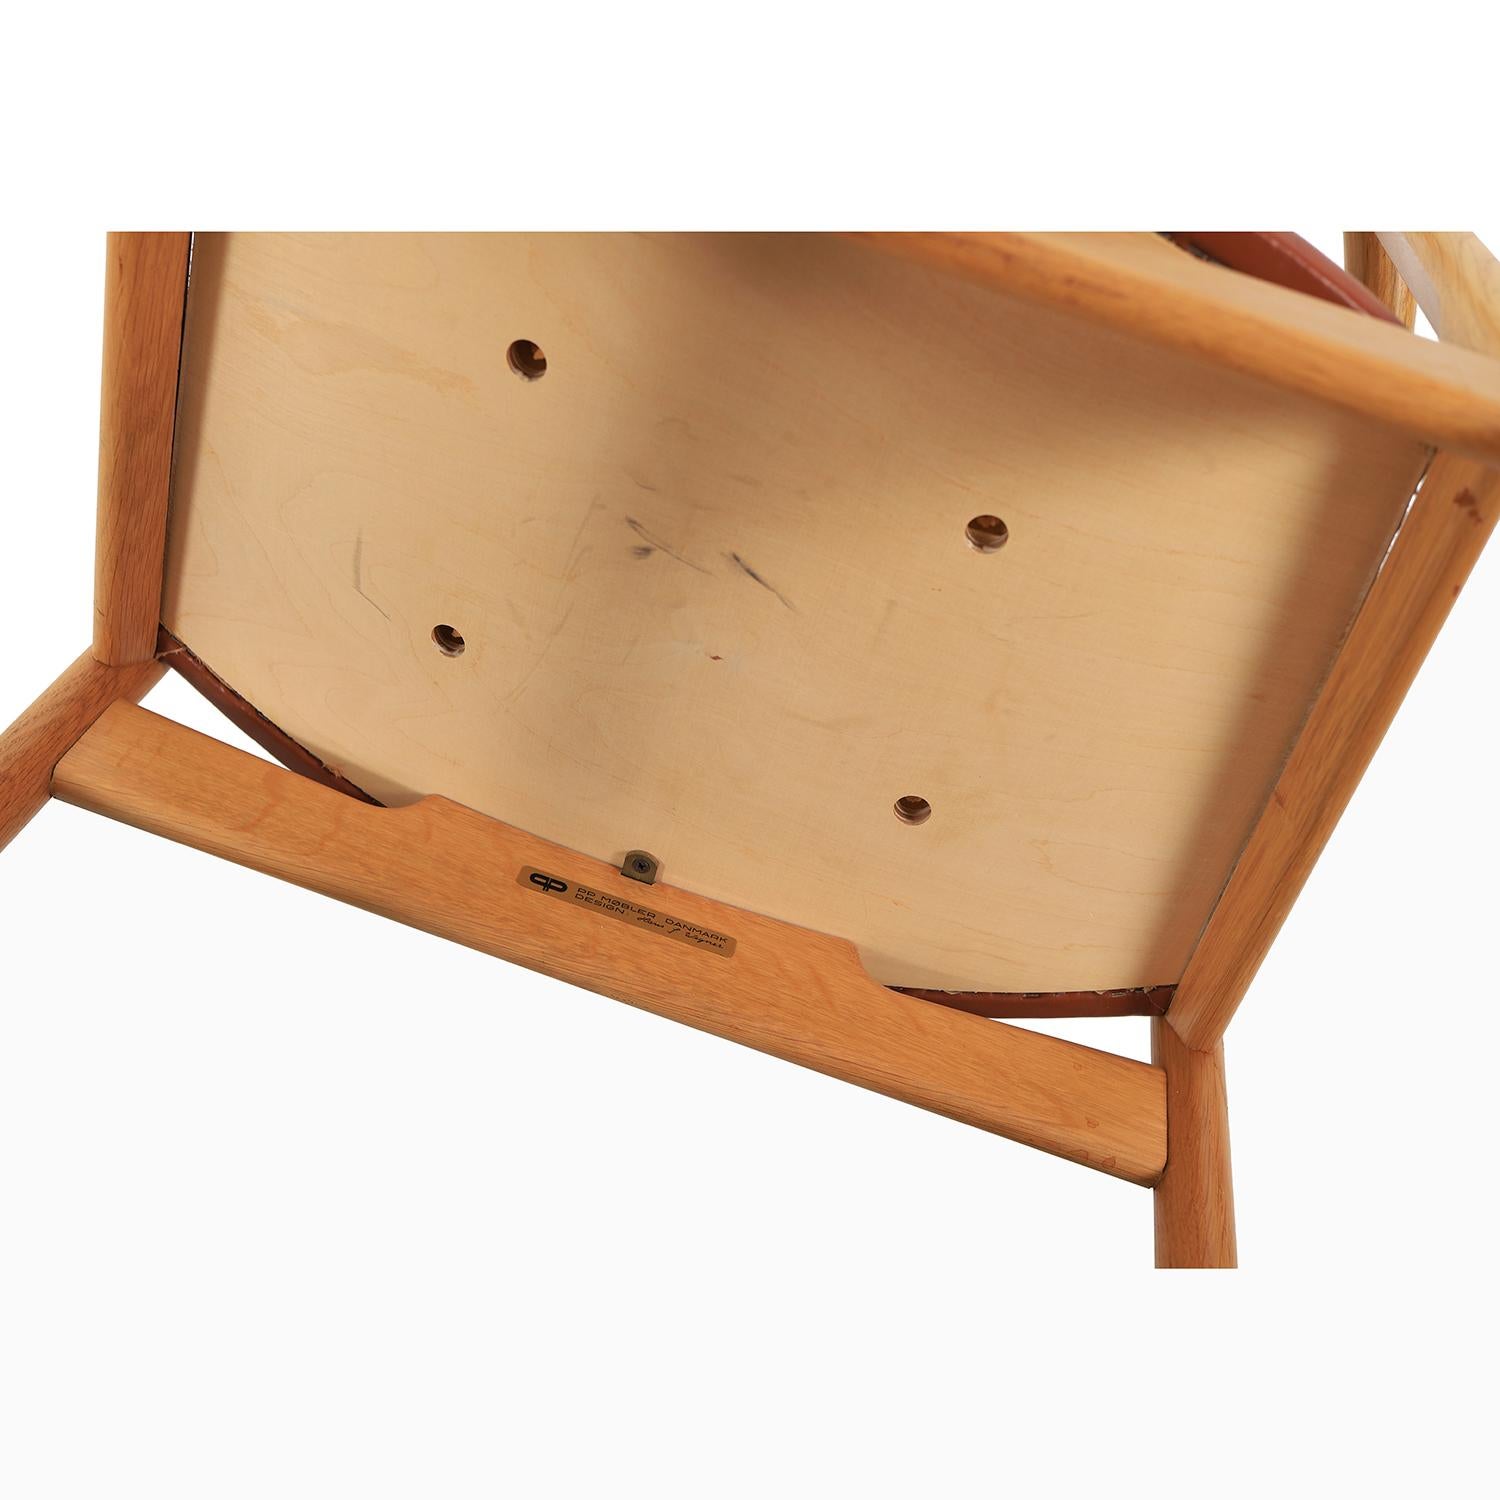 A Danish modern armchair designed by Danish Architect Hans J. Wegner and produced by PP Mobler. A design that emulated a lot of other Wegner’s famous designs. lacquered oak frame inlayed with wenge. A minimalistic design but with very complicated